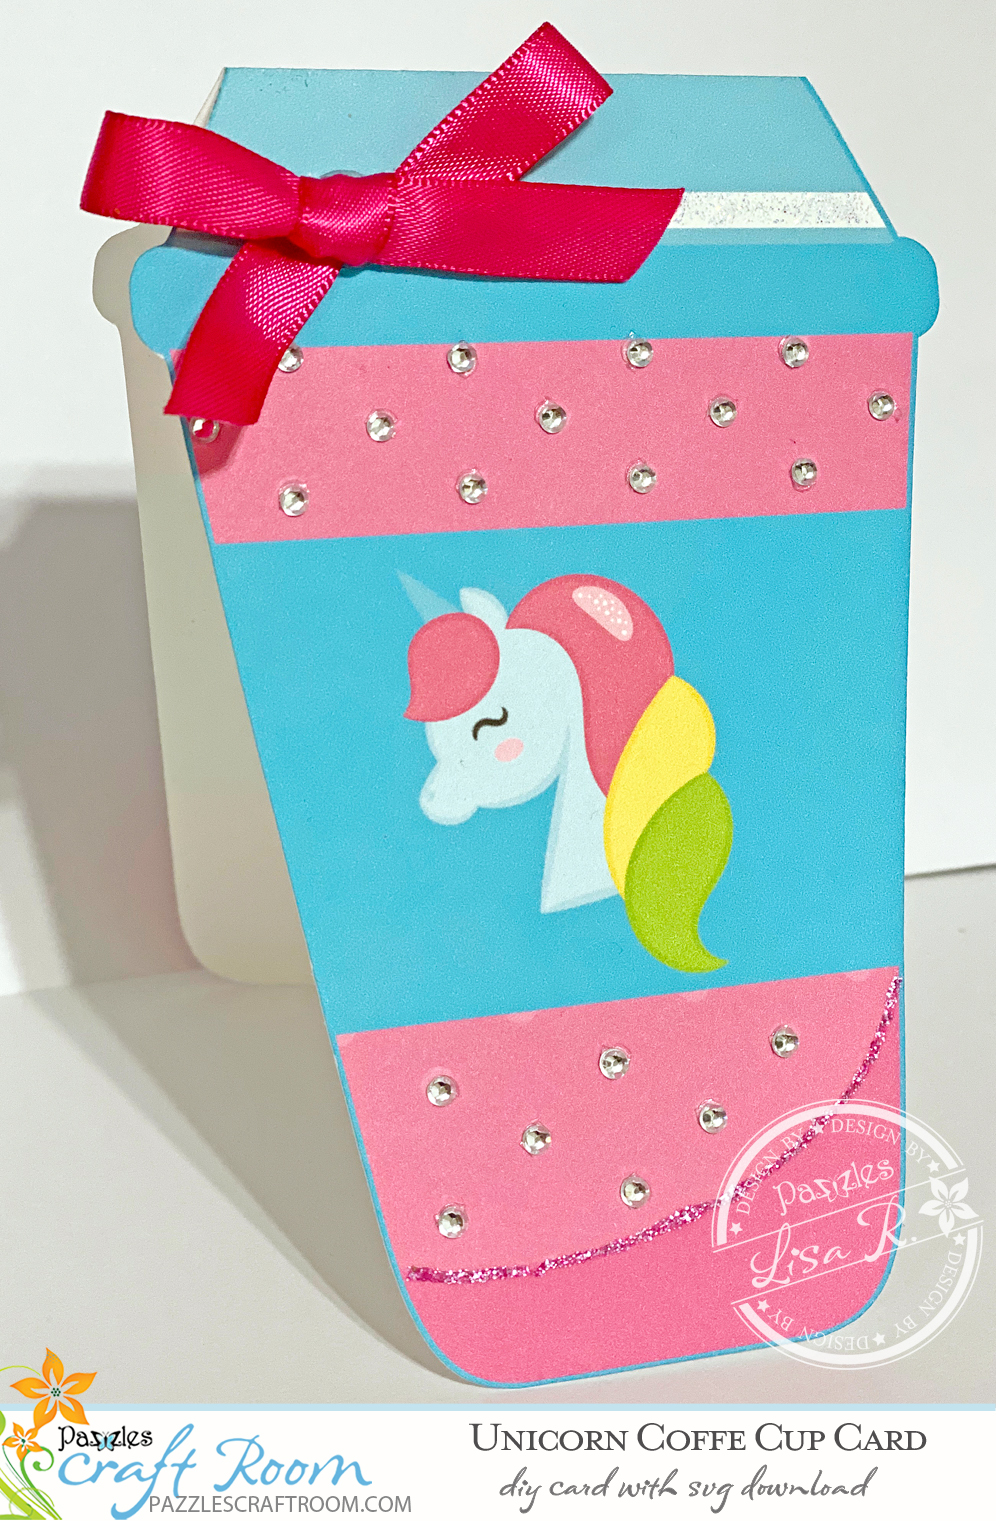 Pazzles DIY Unicorn Coffee Cup Card with instant SVG download. Compatible with all major electronic cutters including Pazzles Inspiration, Cricut, and Silhouette Cameo. Design by Lisa Reyna.